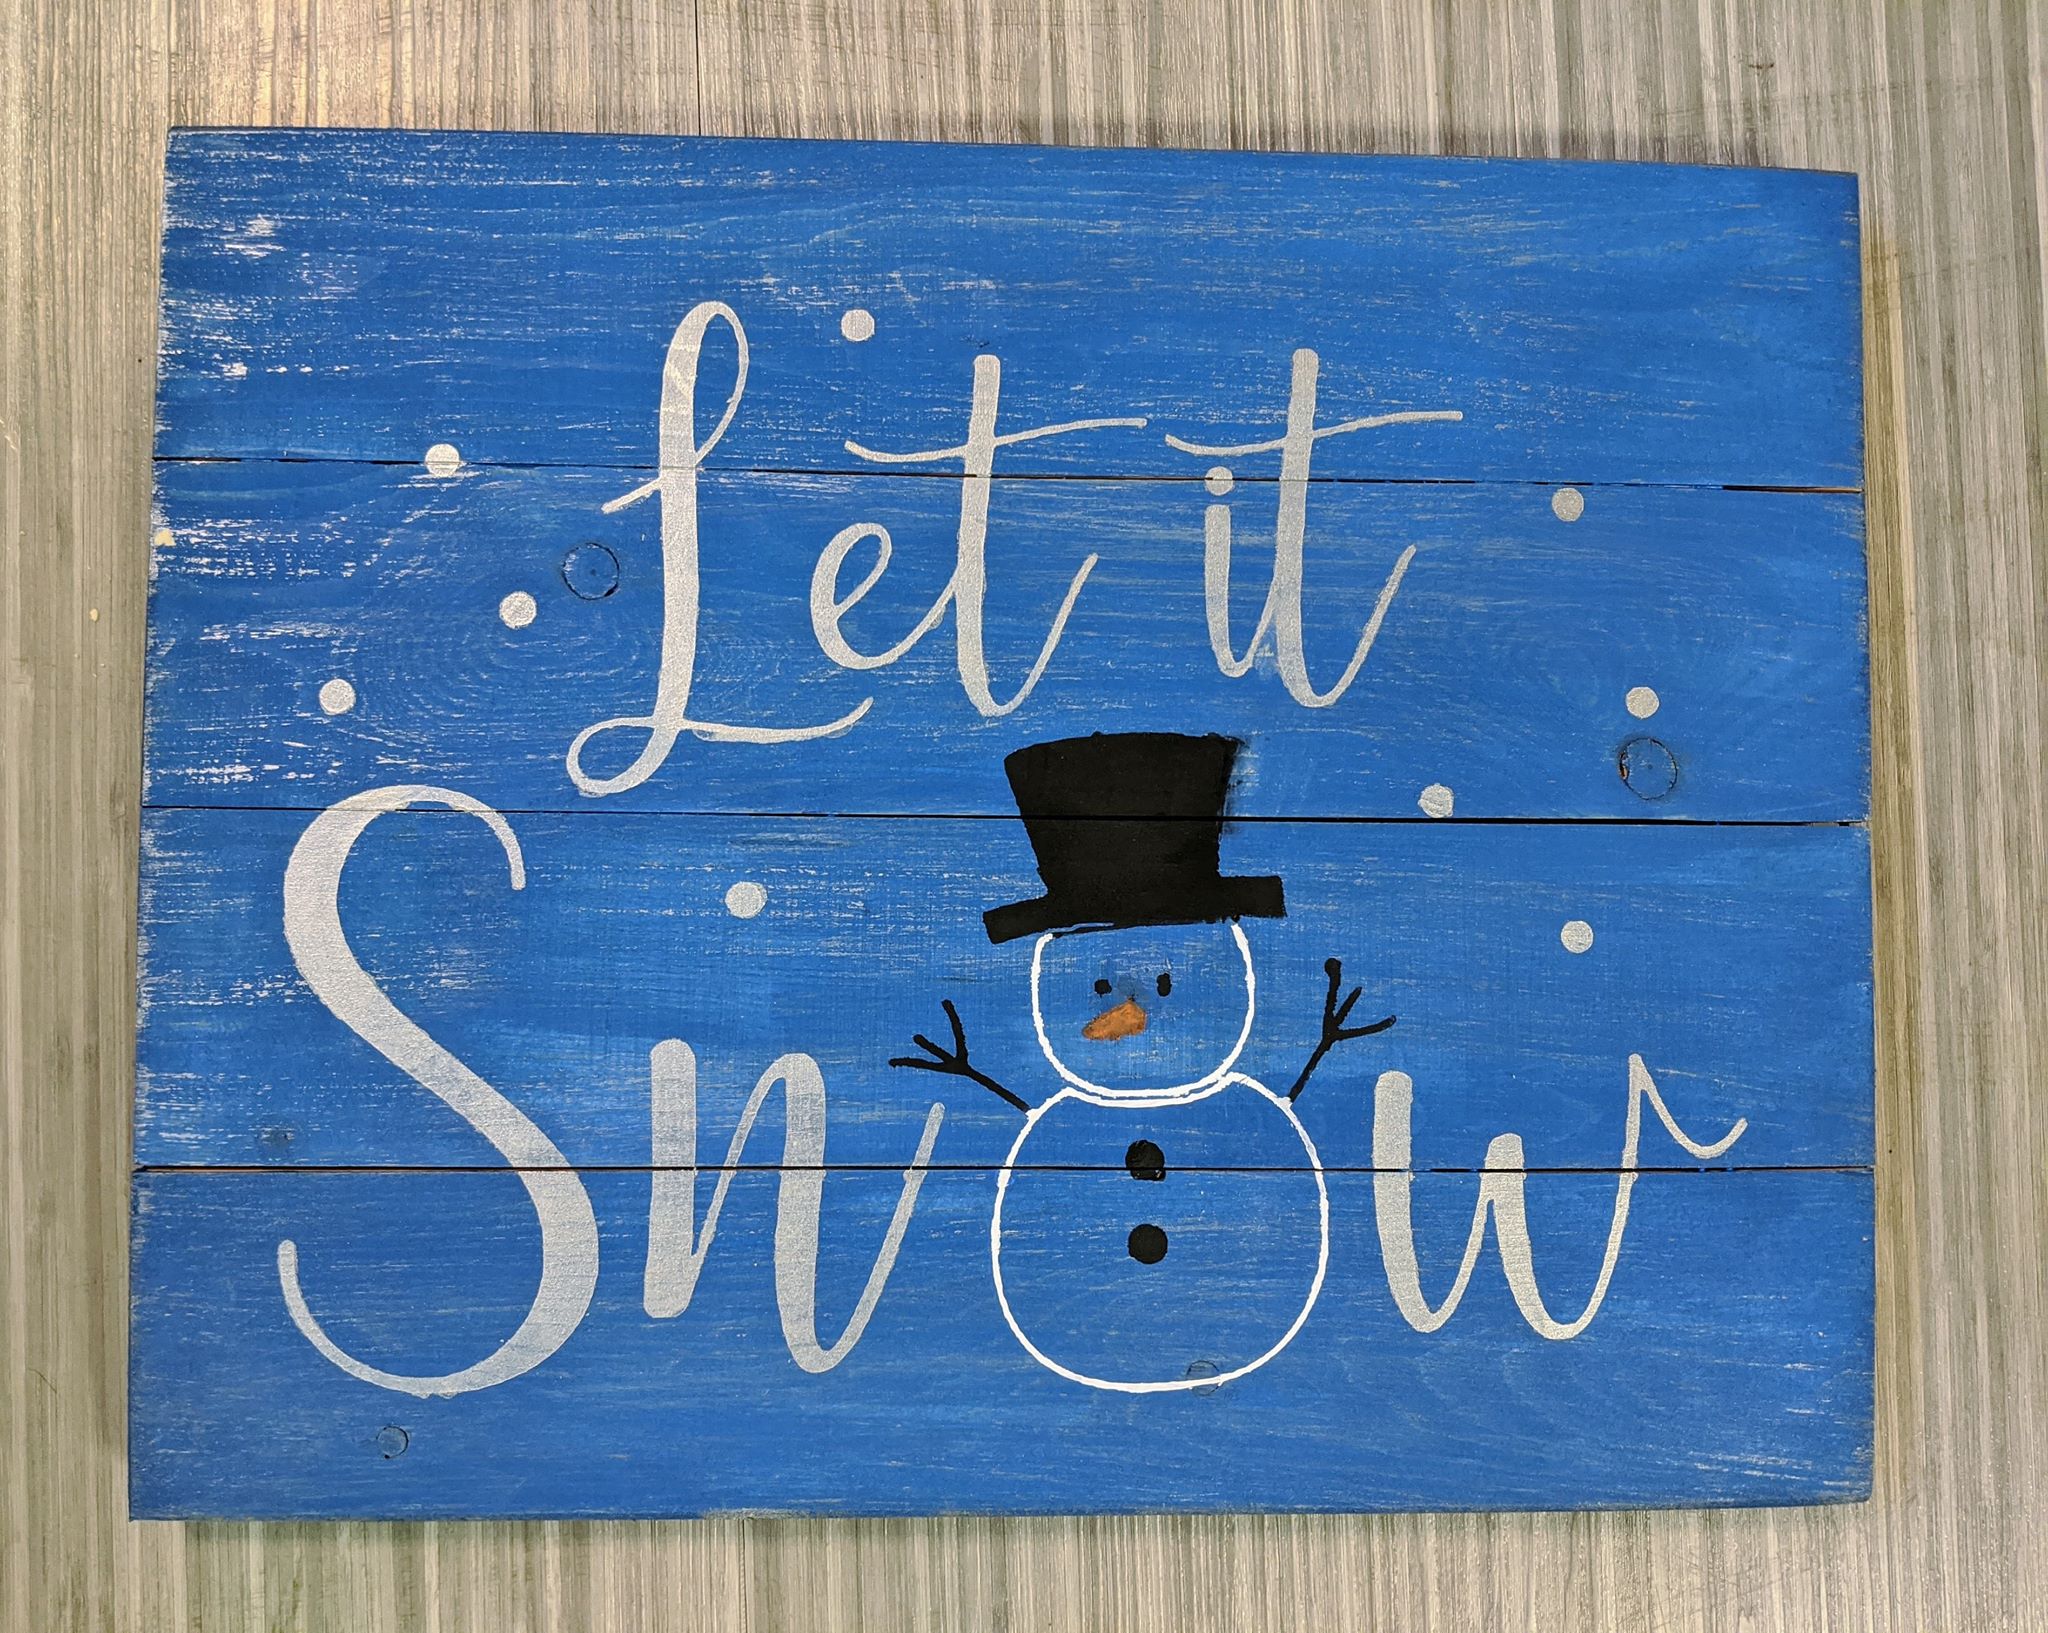 Let it snow with snowman in O